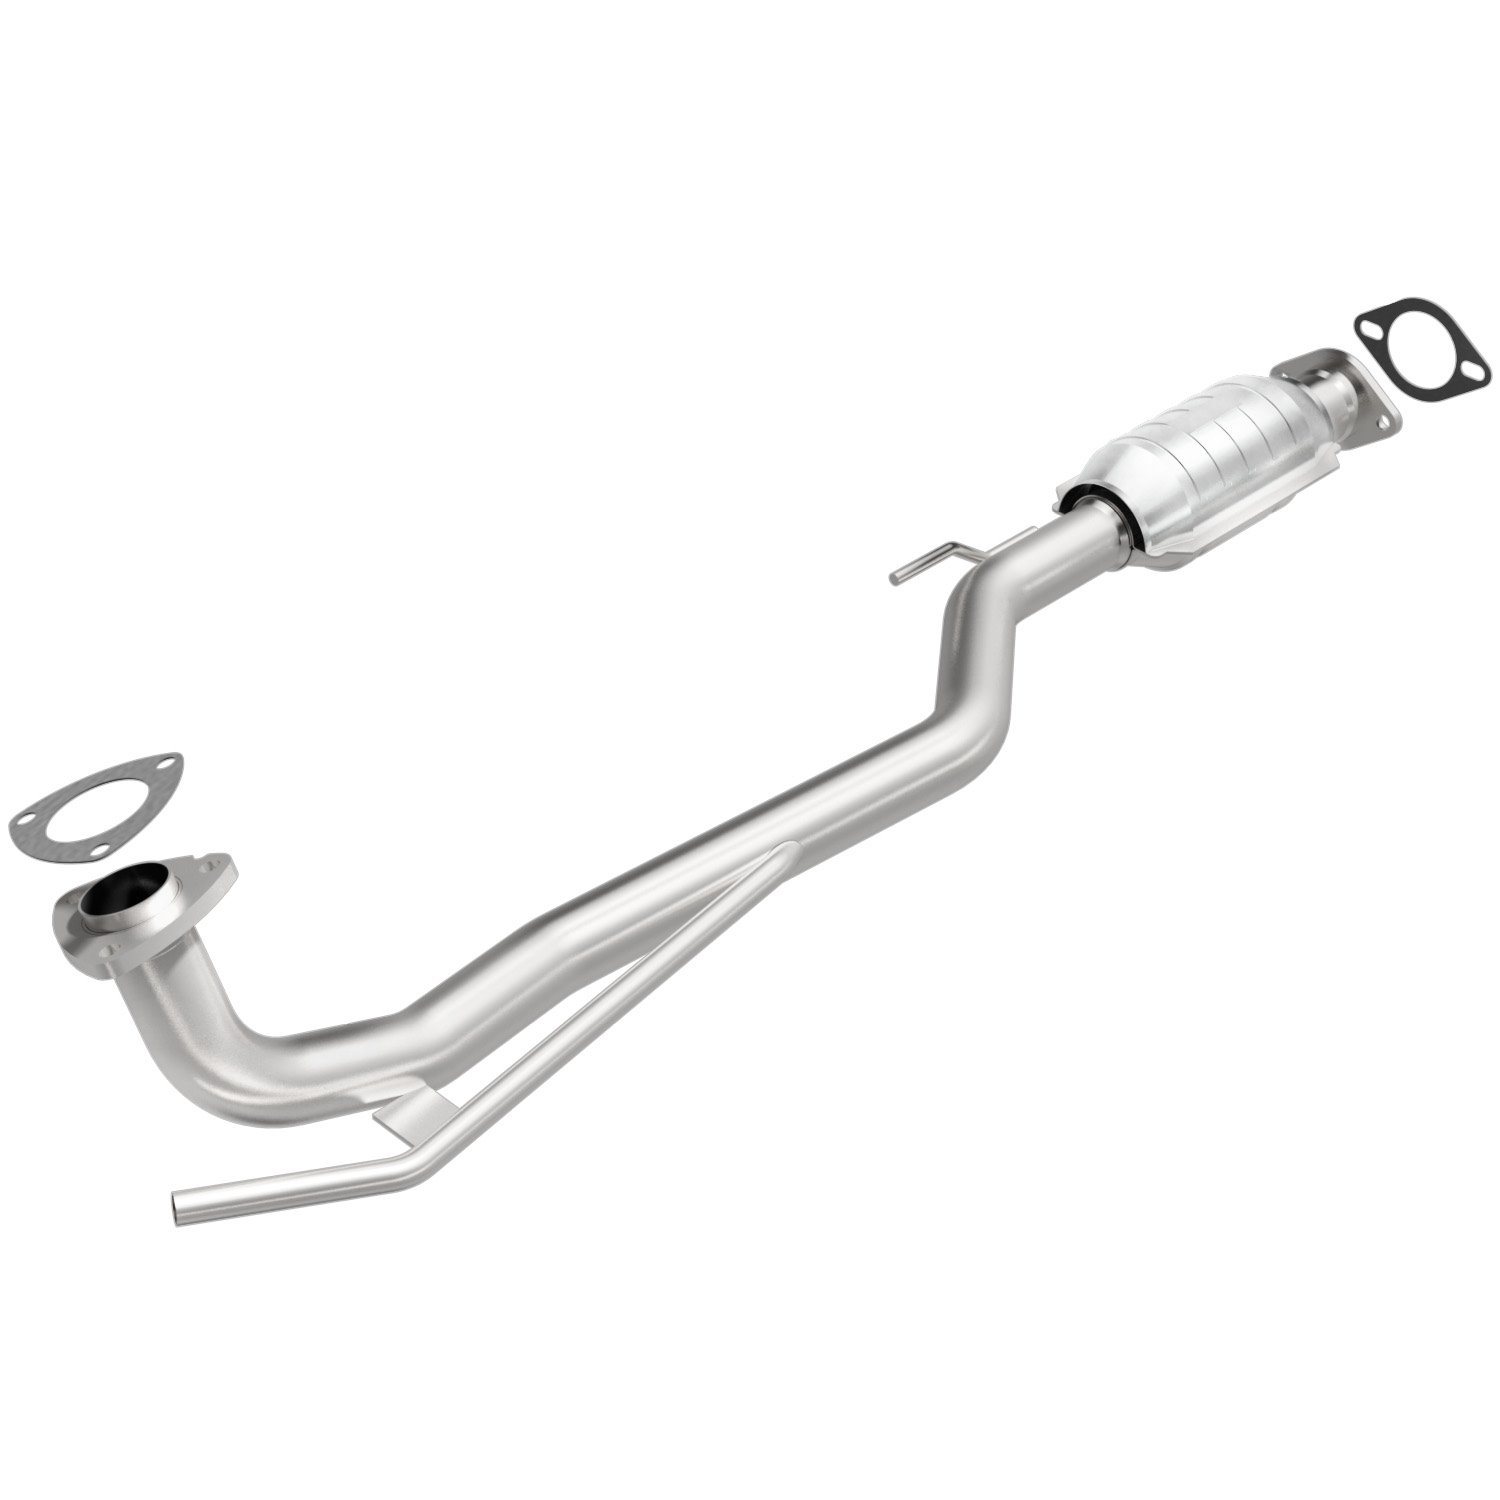 Direct-Fit Catalytic Converter 1990-95 for Nissan 300ZX 3.0L